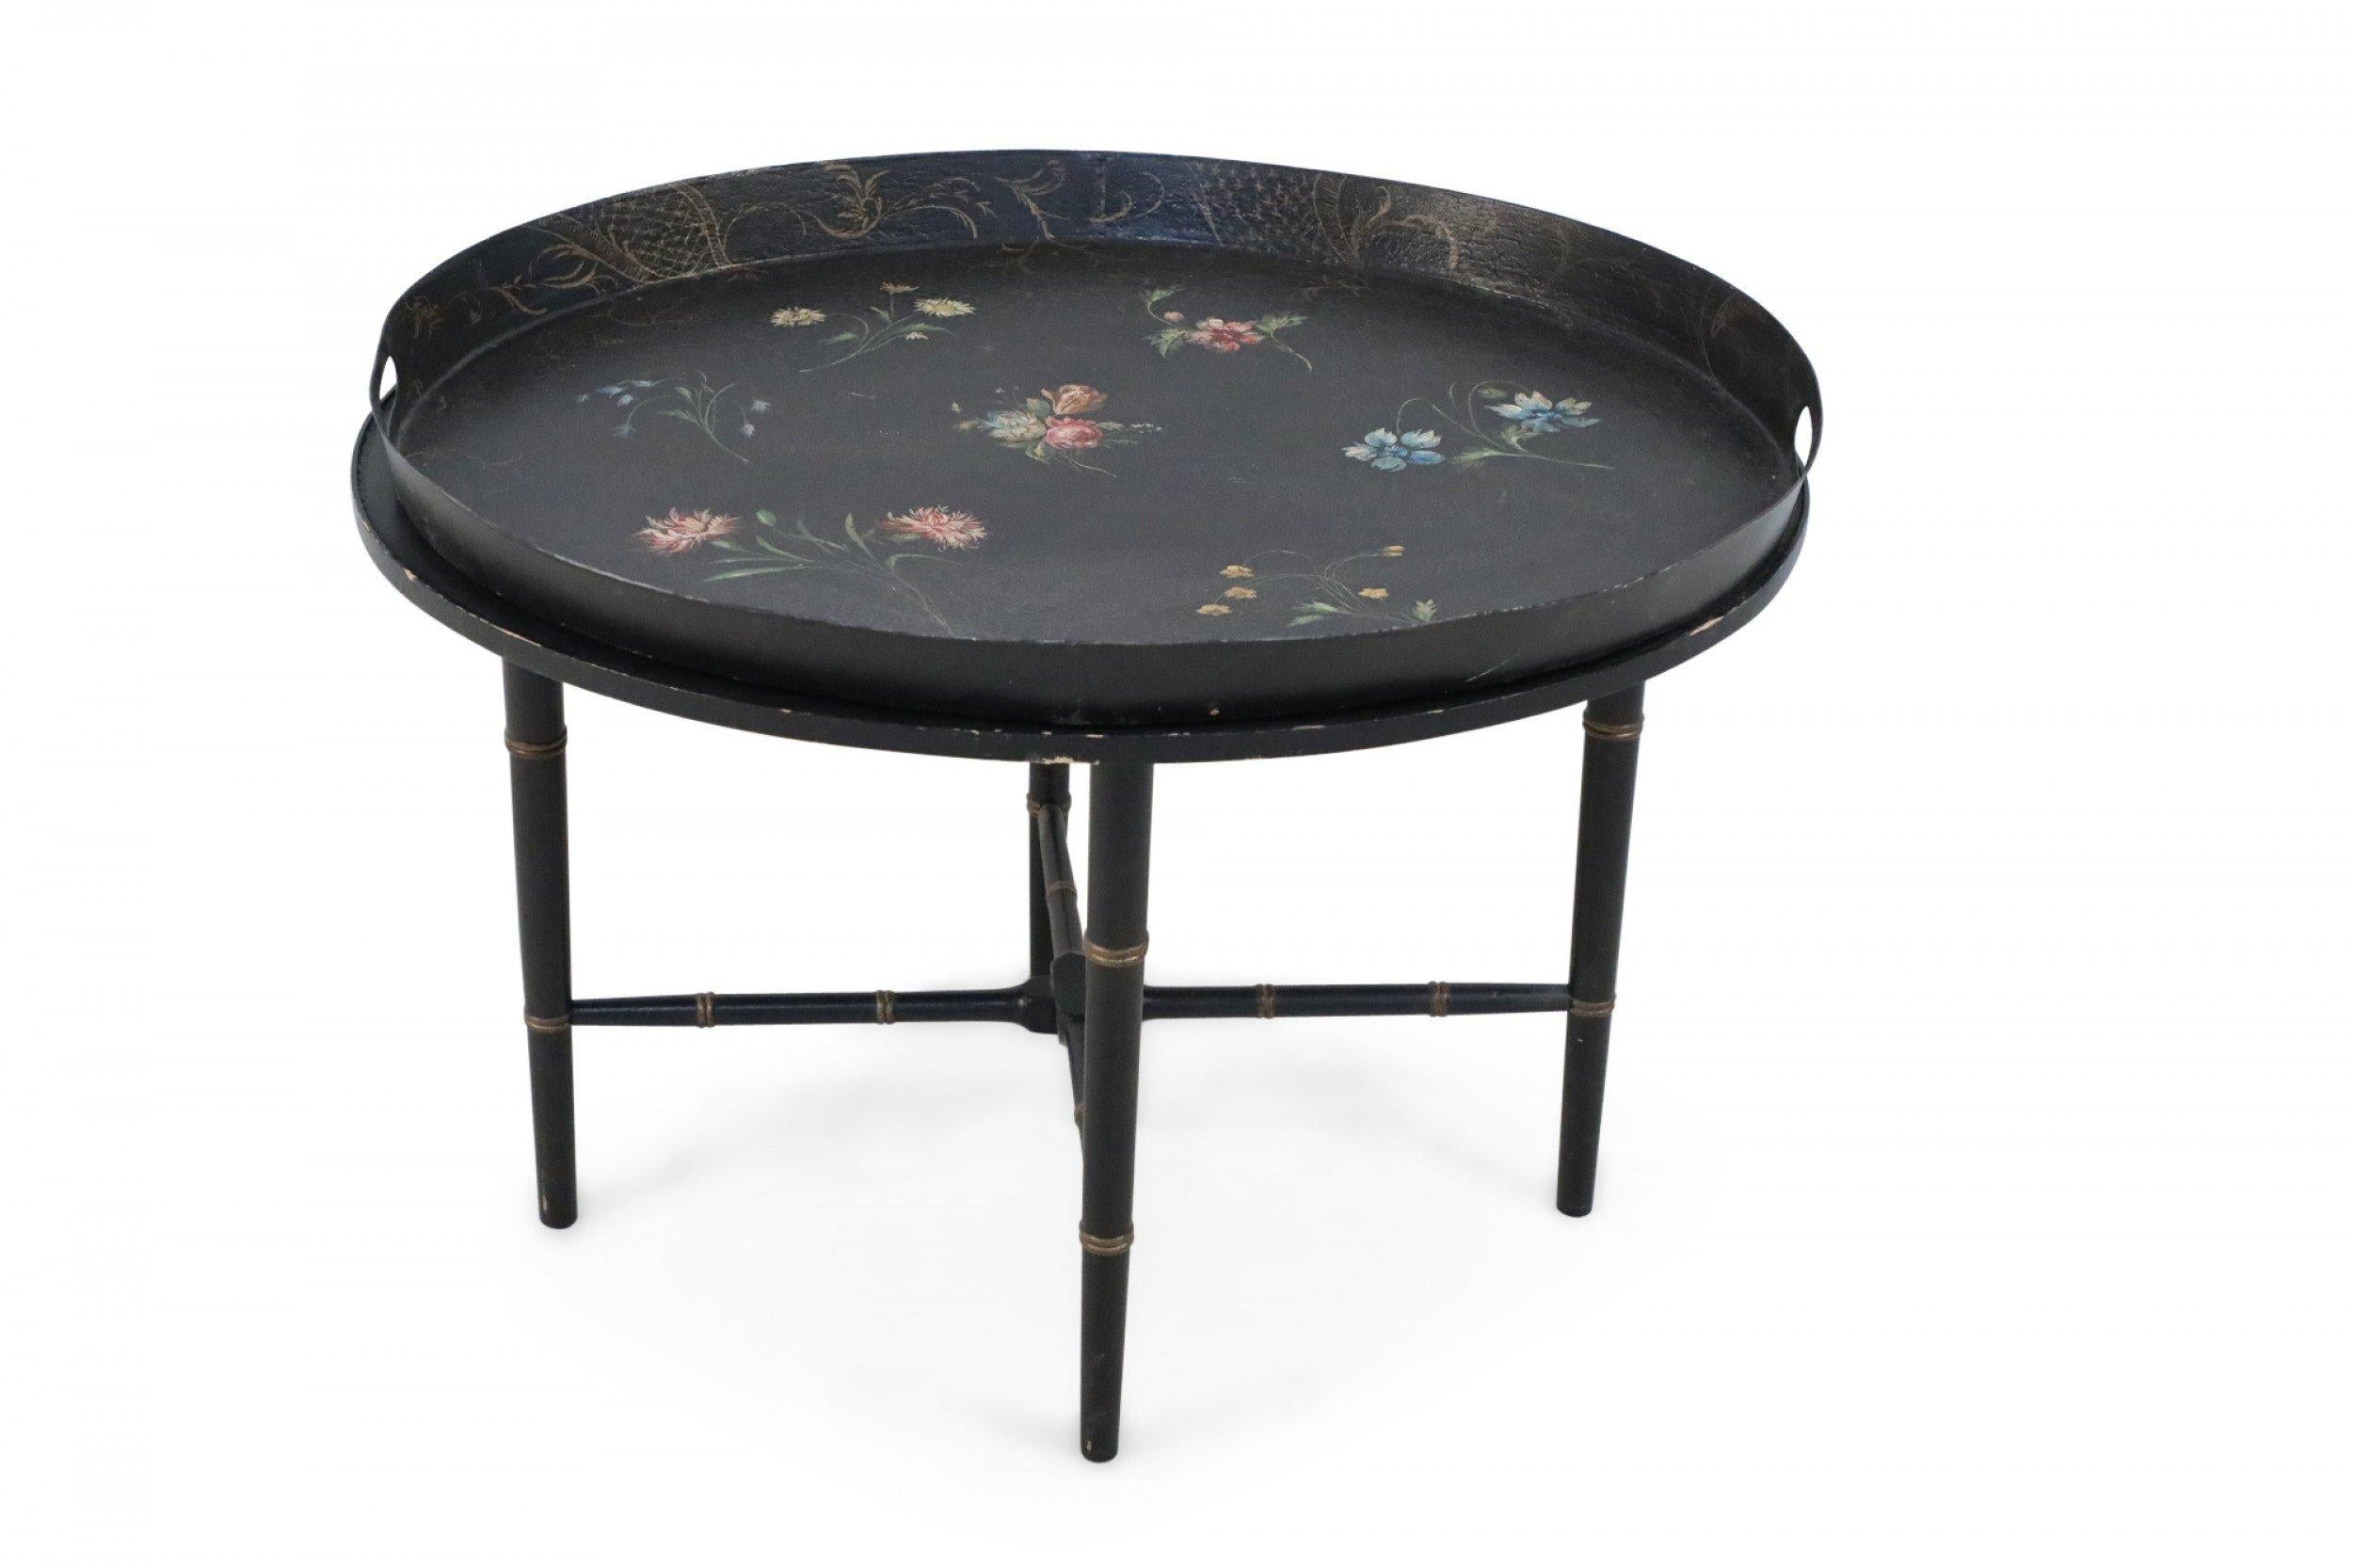 English Regency-style tray top coffee table in black, topped with an oval, removable tray painted with spaced pink and blue floral bouquets, sitting atop gold-accented ebonized faux bamboo metal legs that are connected with an x-shaped